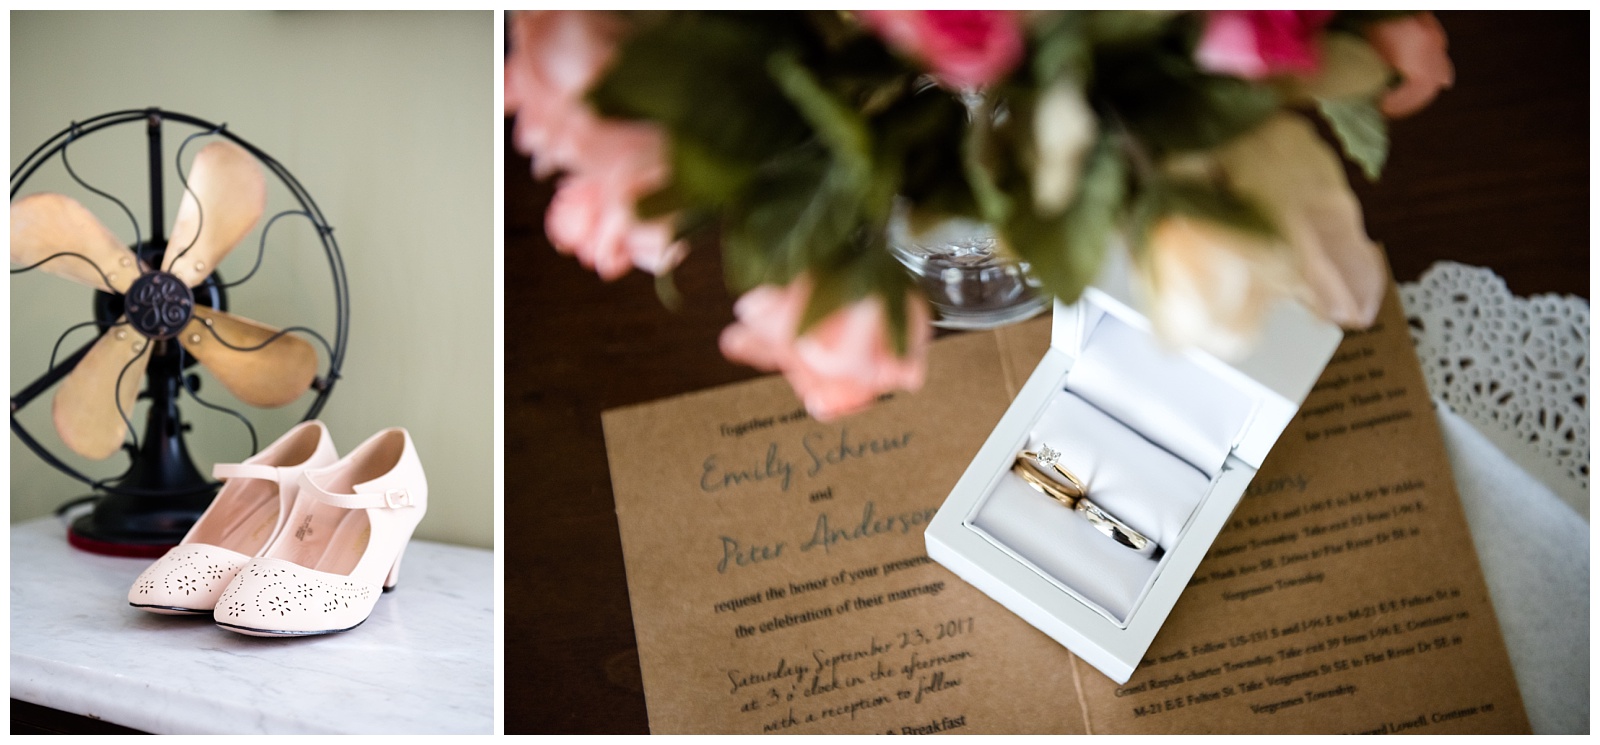 Michigan outdoor summer wedding at River Edge Bed and Breakfast